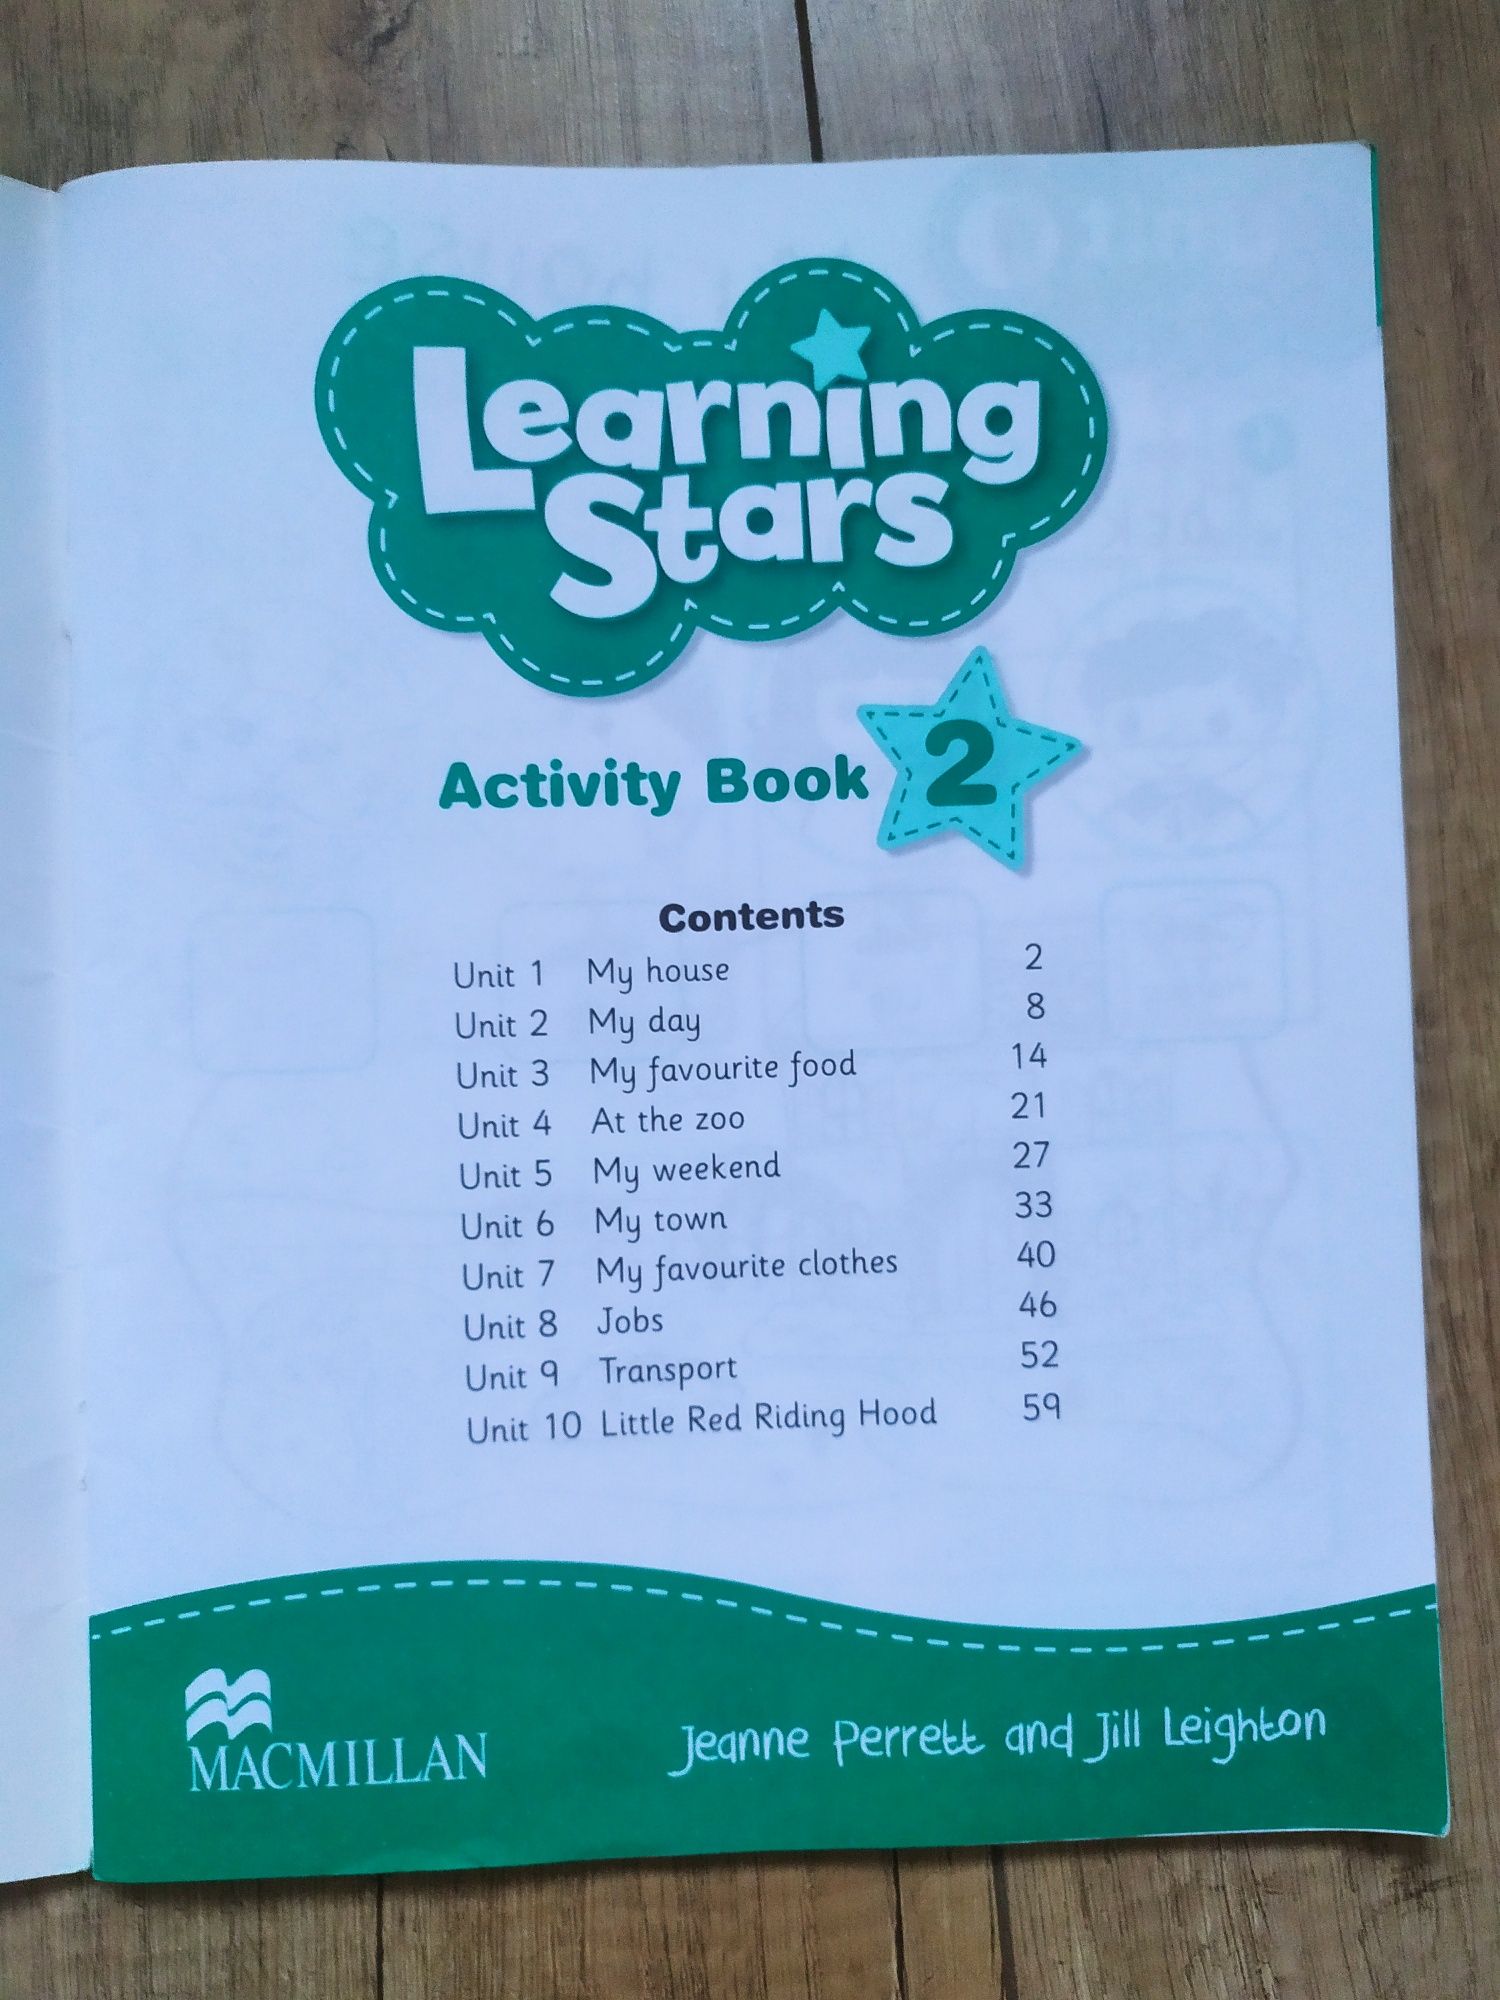 Learning stars 2 Activity book